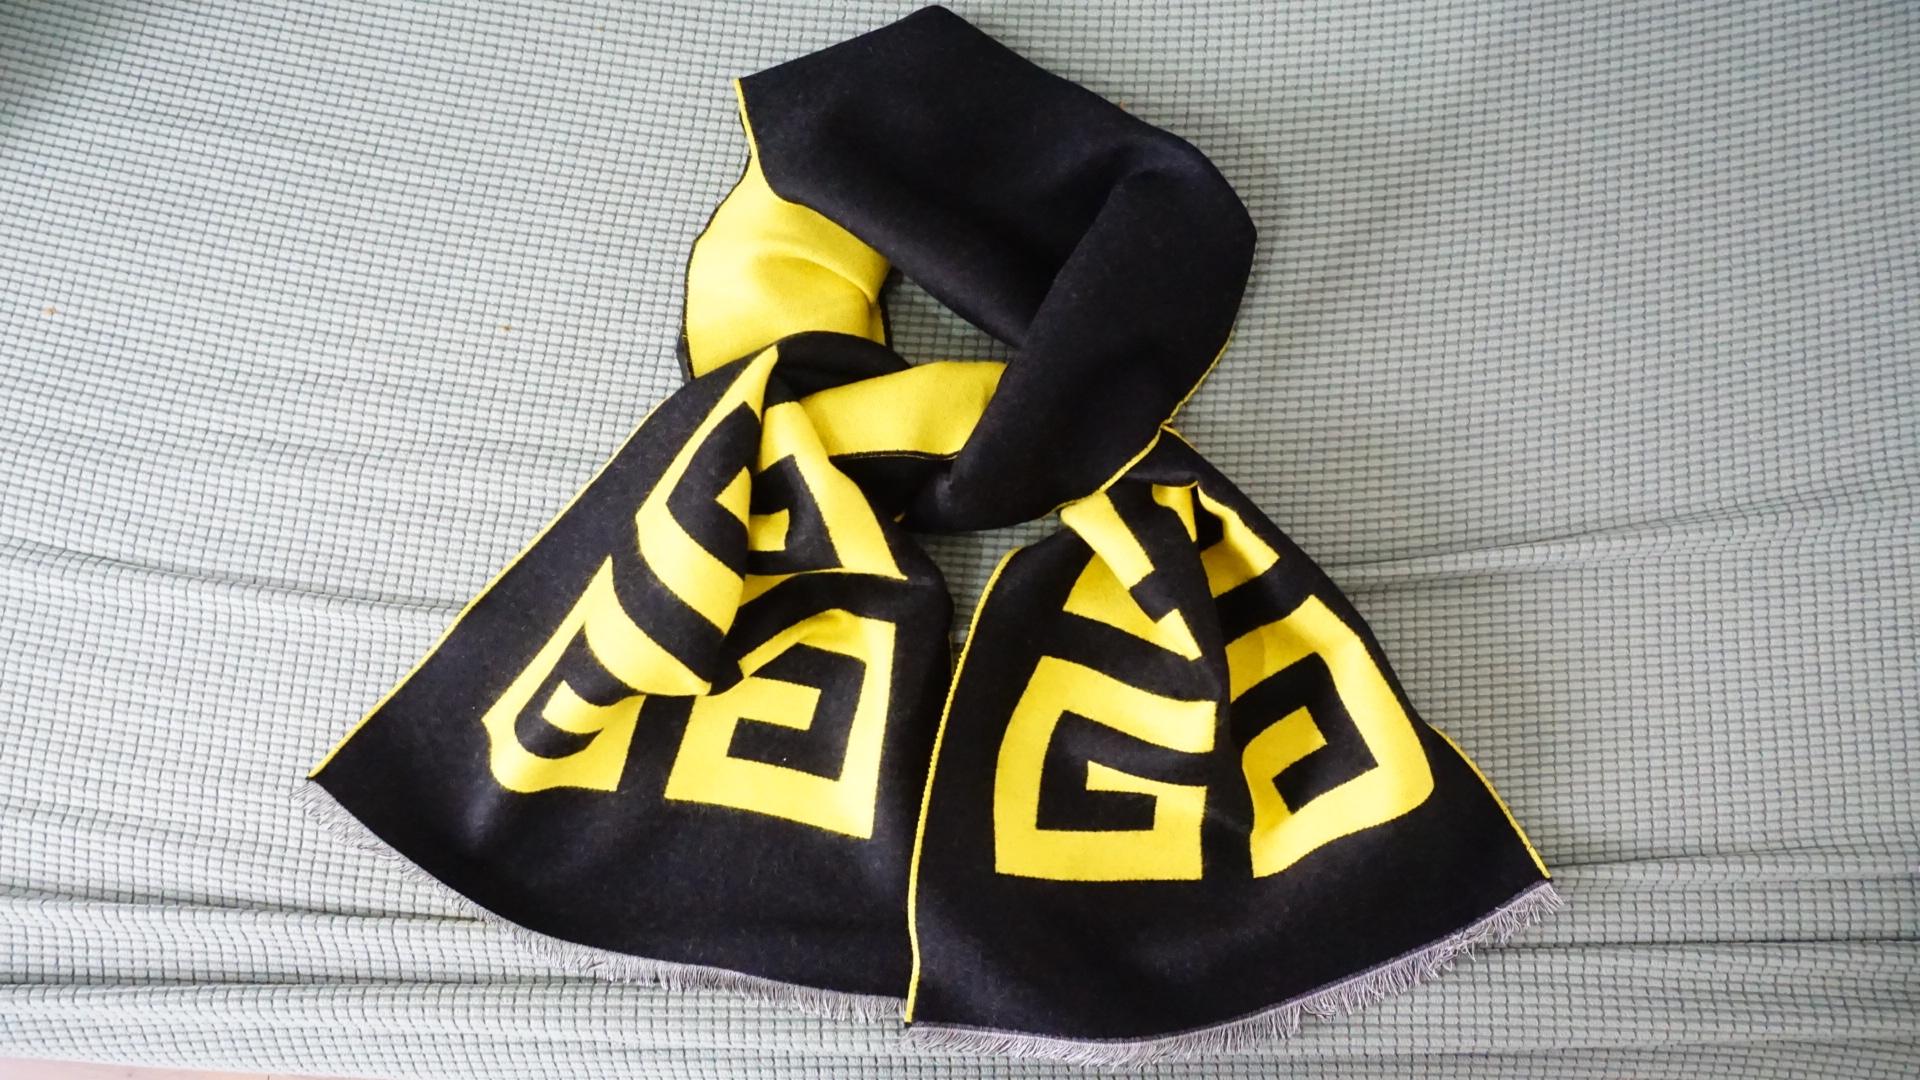 100% GENUINE

Black and yellow

40*190cm

Lightweight

Block swirl pattern

93% Wool, 7% Silk

Dry Clean

_ _ _

Great for everyday wear. Come with velvet pouch and beautiful package.

Makes the perfect gift for Teens, Sisters, Friends, Girlfriends,